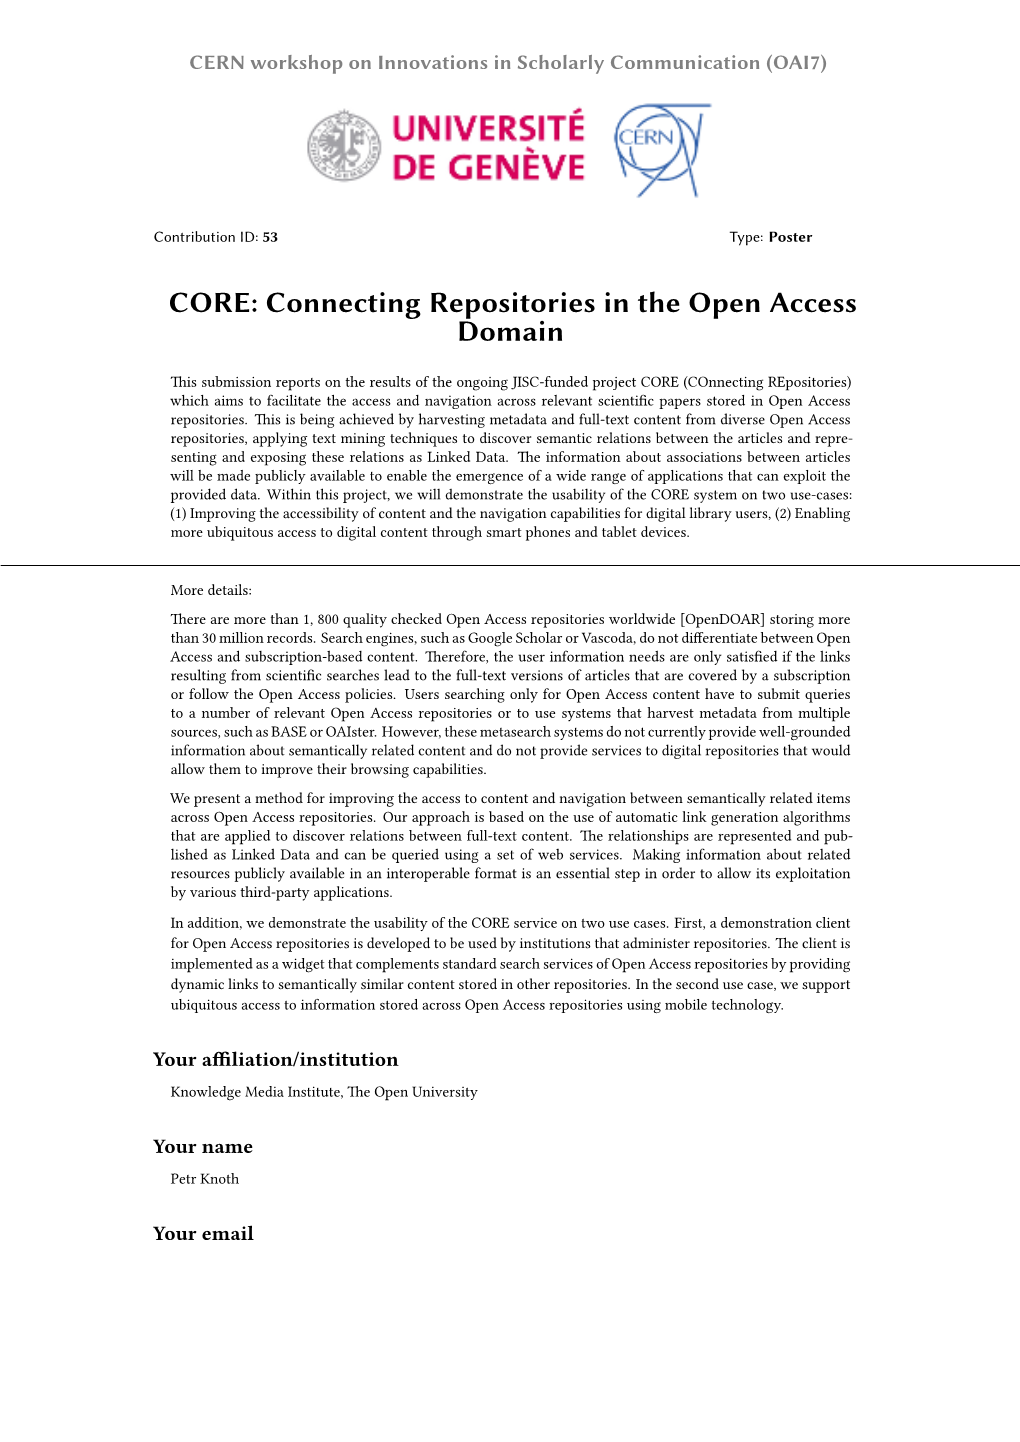 Connecting Repositories in the Open Access Domain